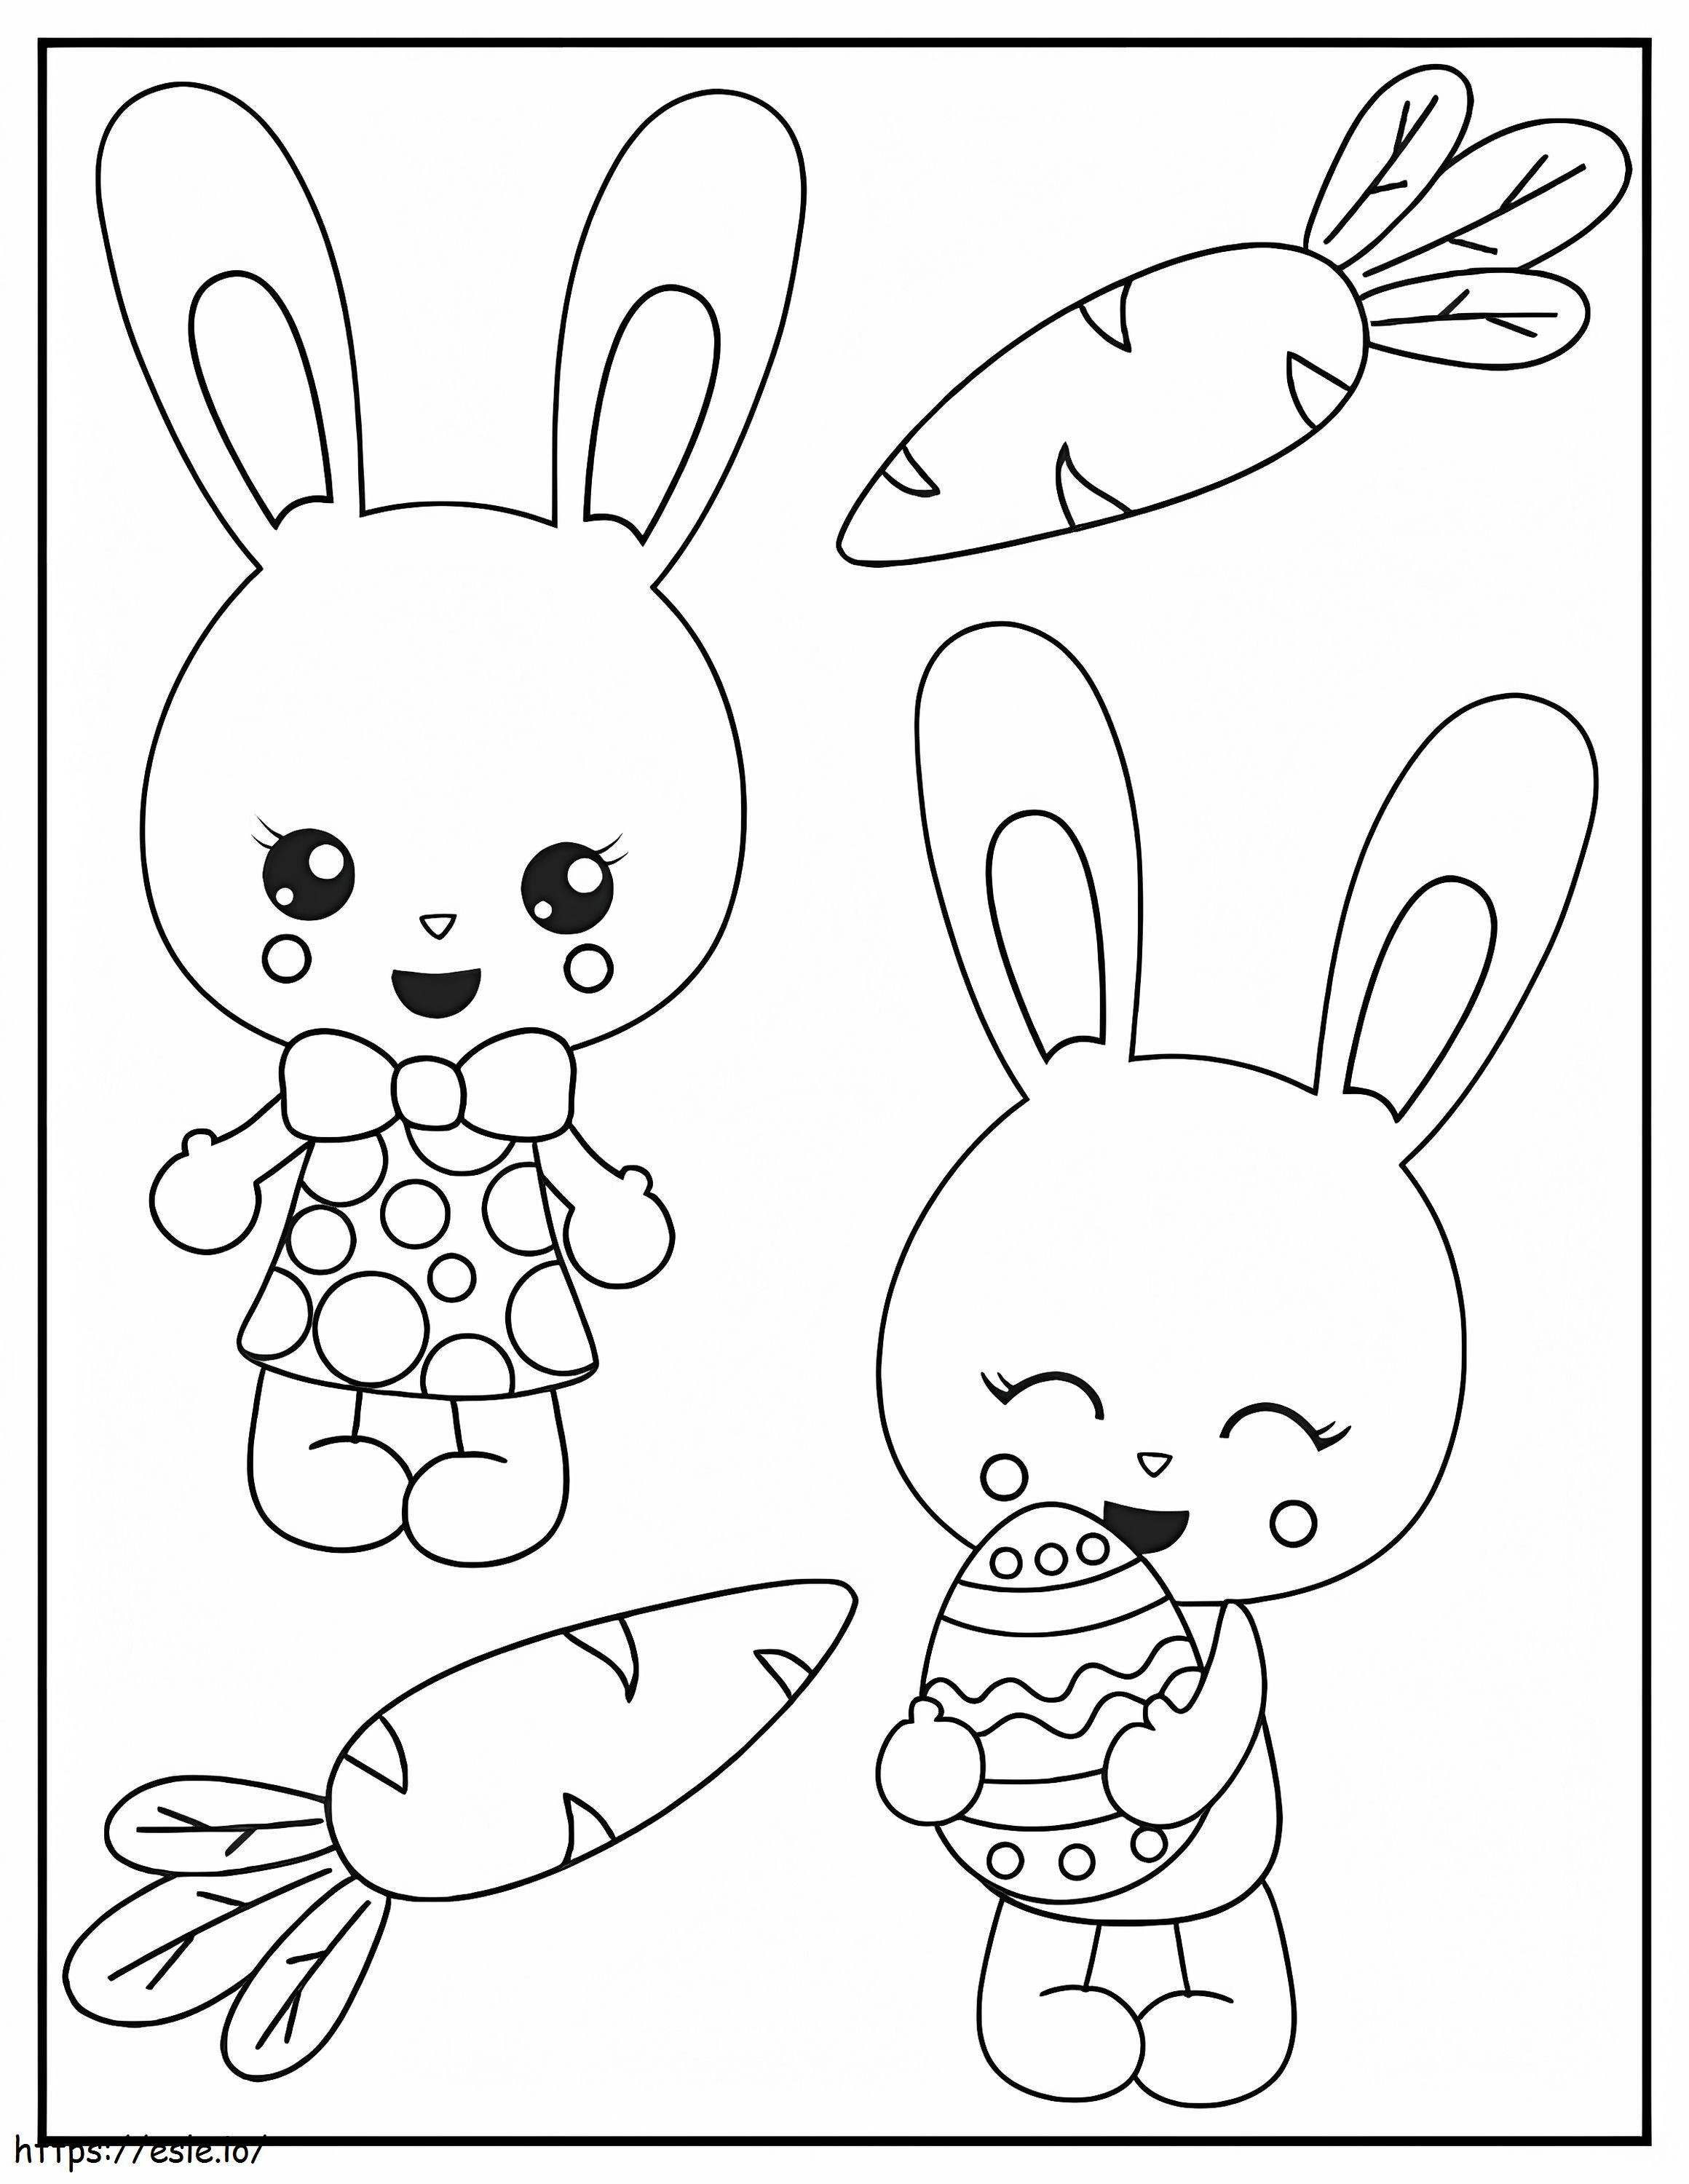 Two Rabbits With Carrot And Easter Egg coloring page